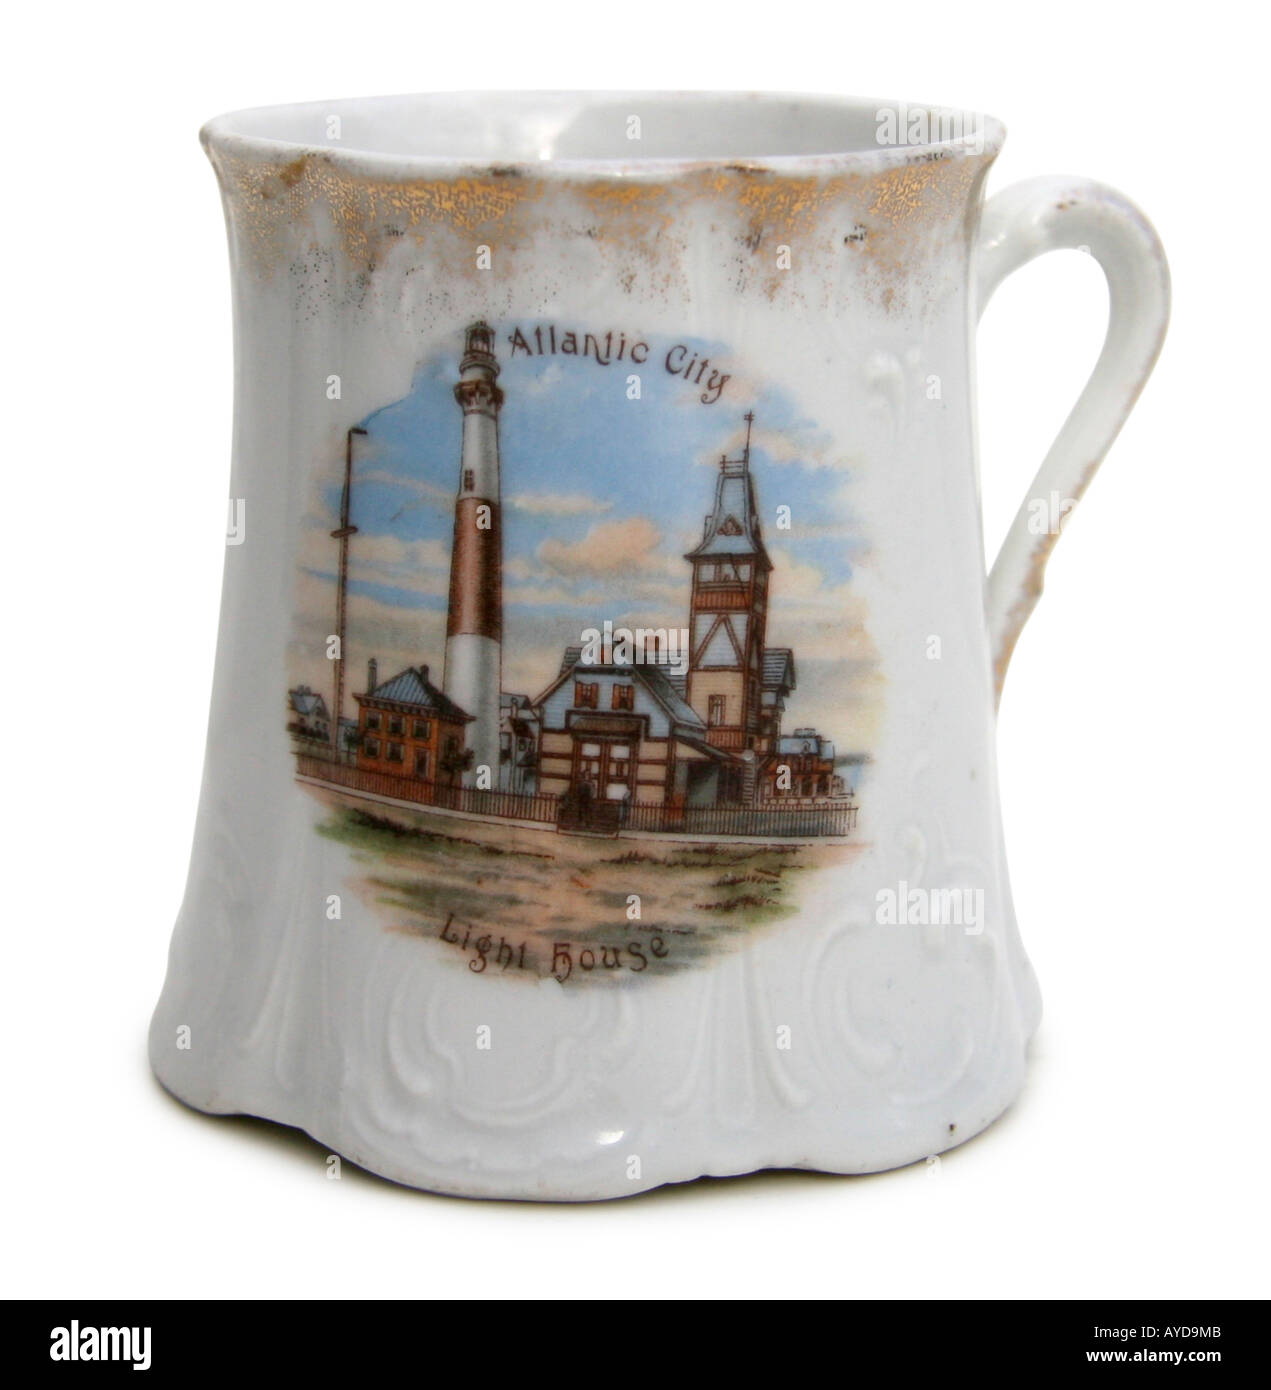 Circa 1900 Atlantic City, New Jersey souvenir china depicting Absecon Light. This image has a clipping path. Stock Photo